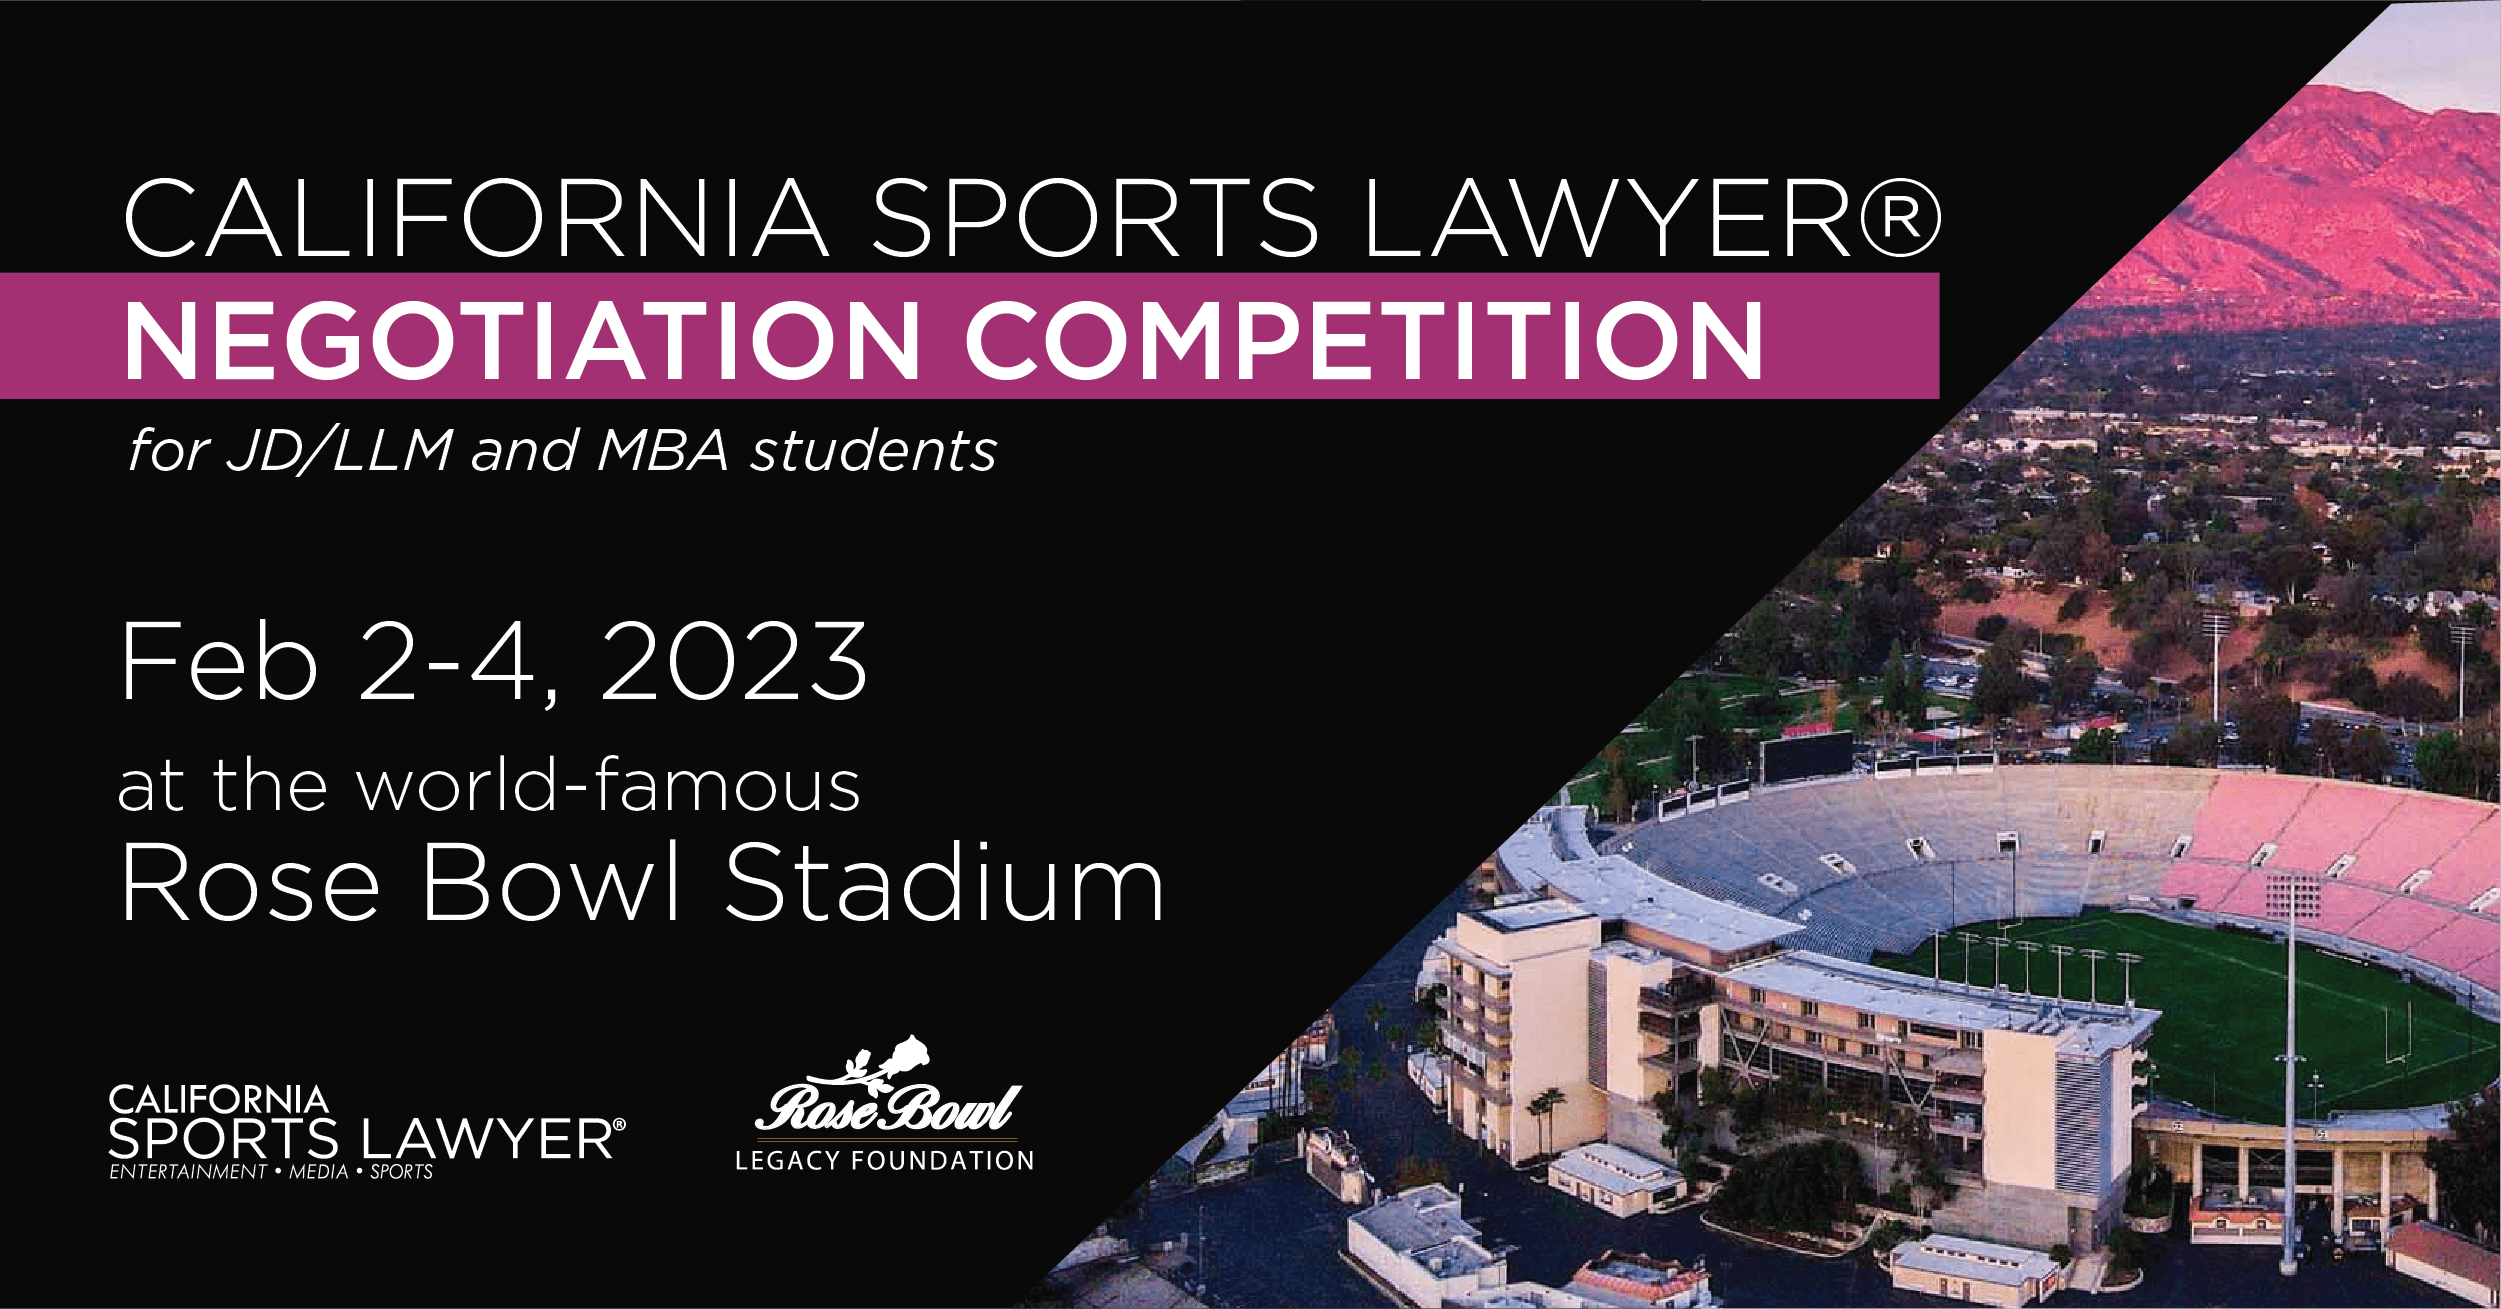 California Sports Lawyer® Negotiation Competition at the Rose Bowl Stadium (February 2-4, 2023)